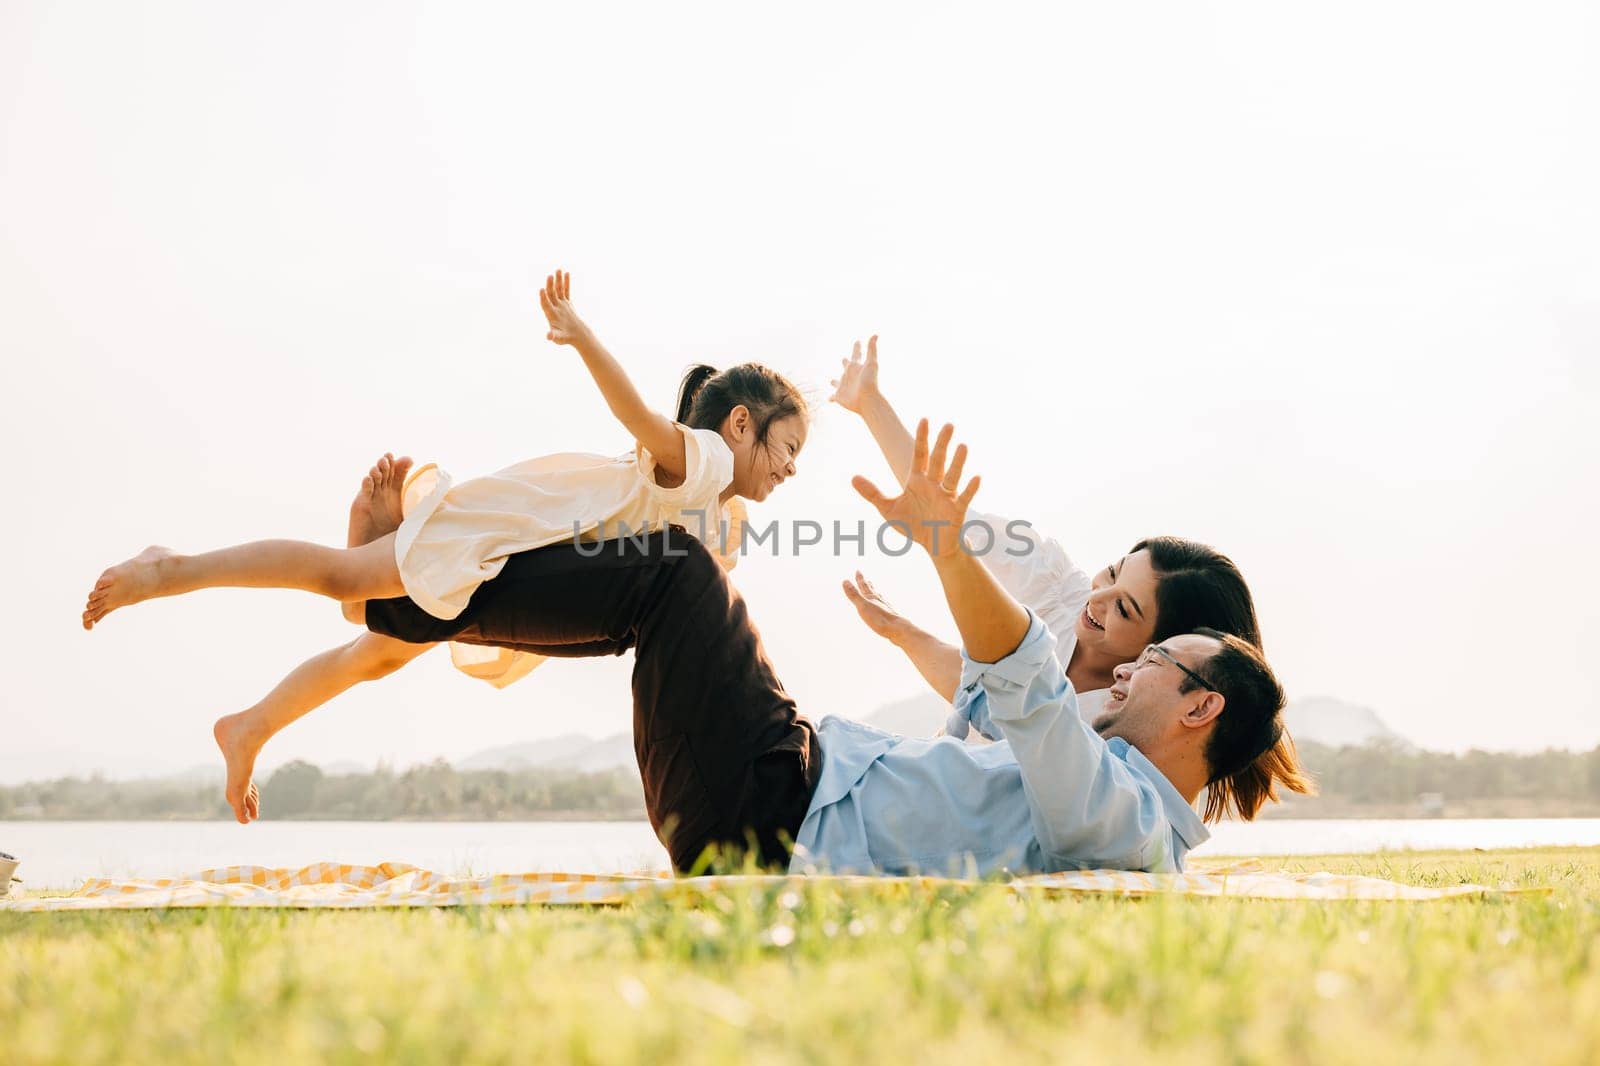 A joyful family moment in the park. Father holds his daughter up high as she smiles and flies like an airplane, while mother looks on with delight. Family fun at its best